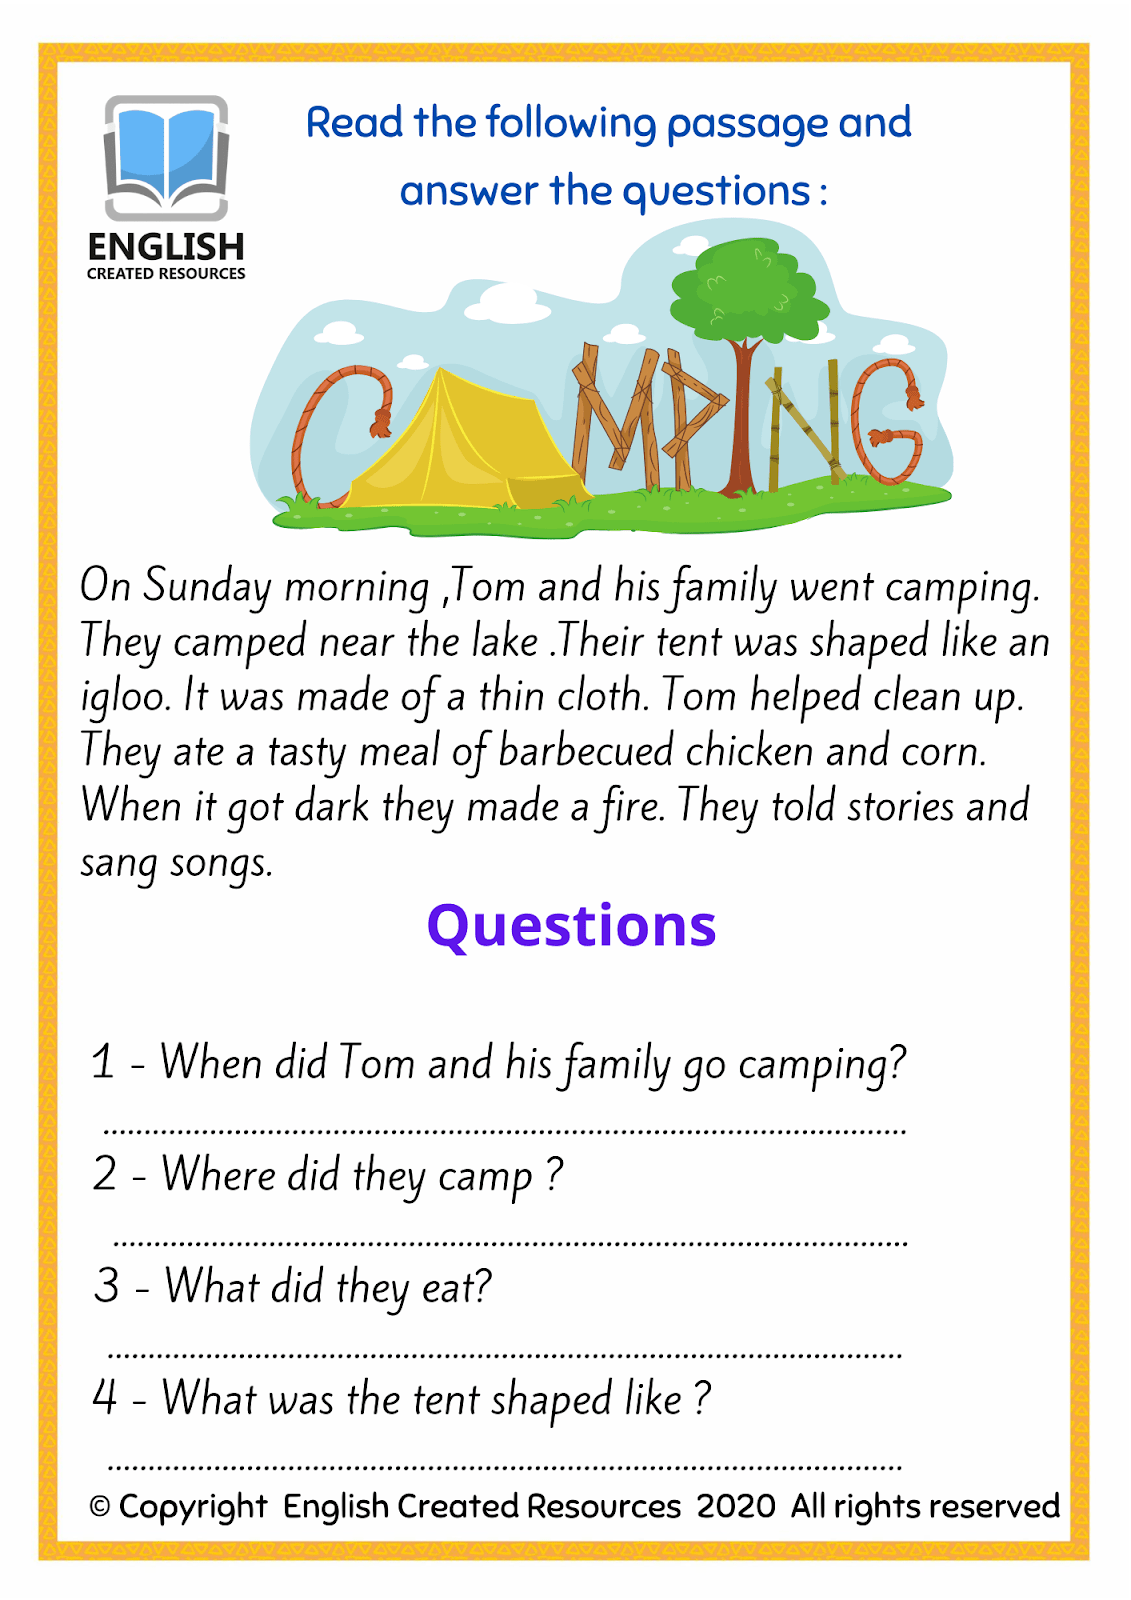 Reading Comprehension Worksheets With Answer Key